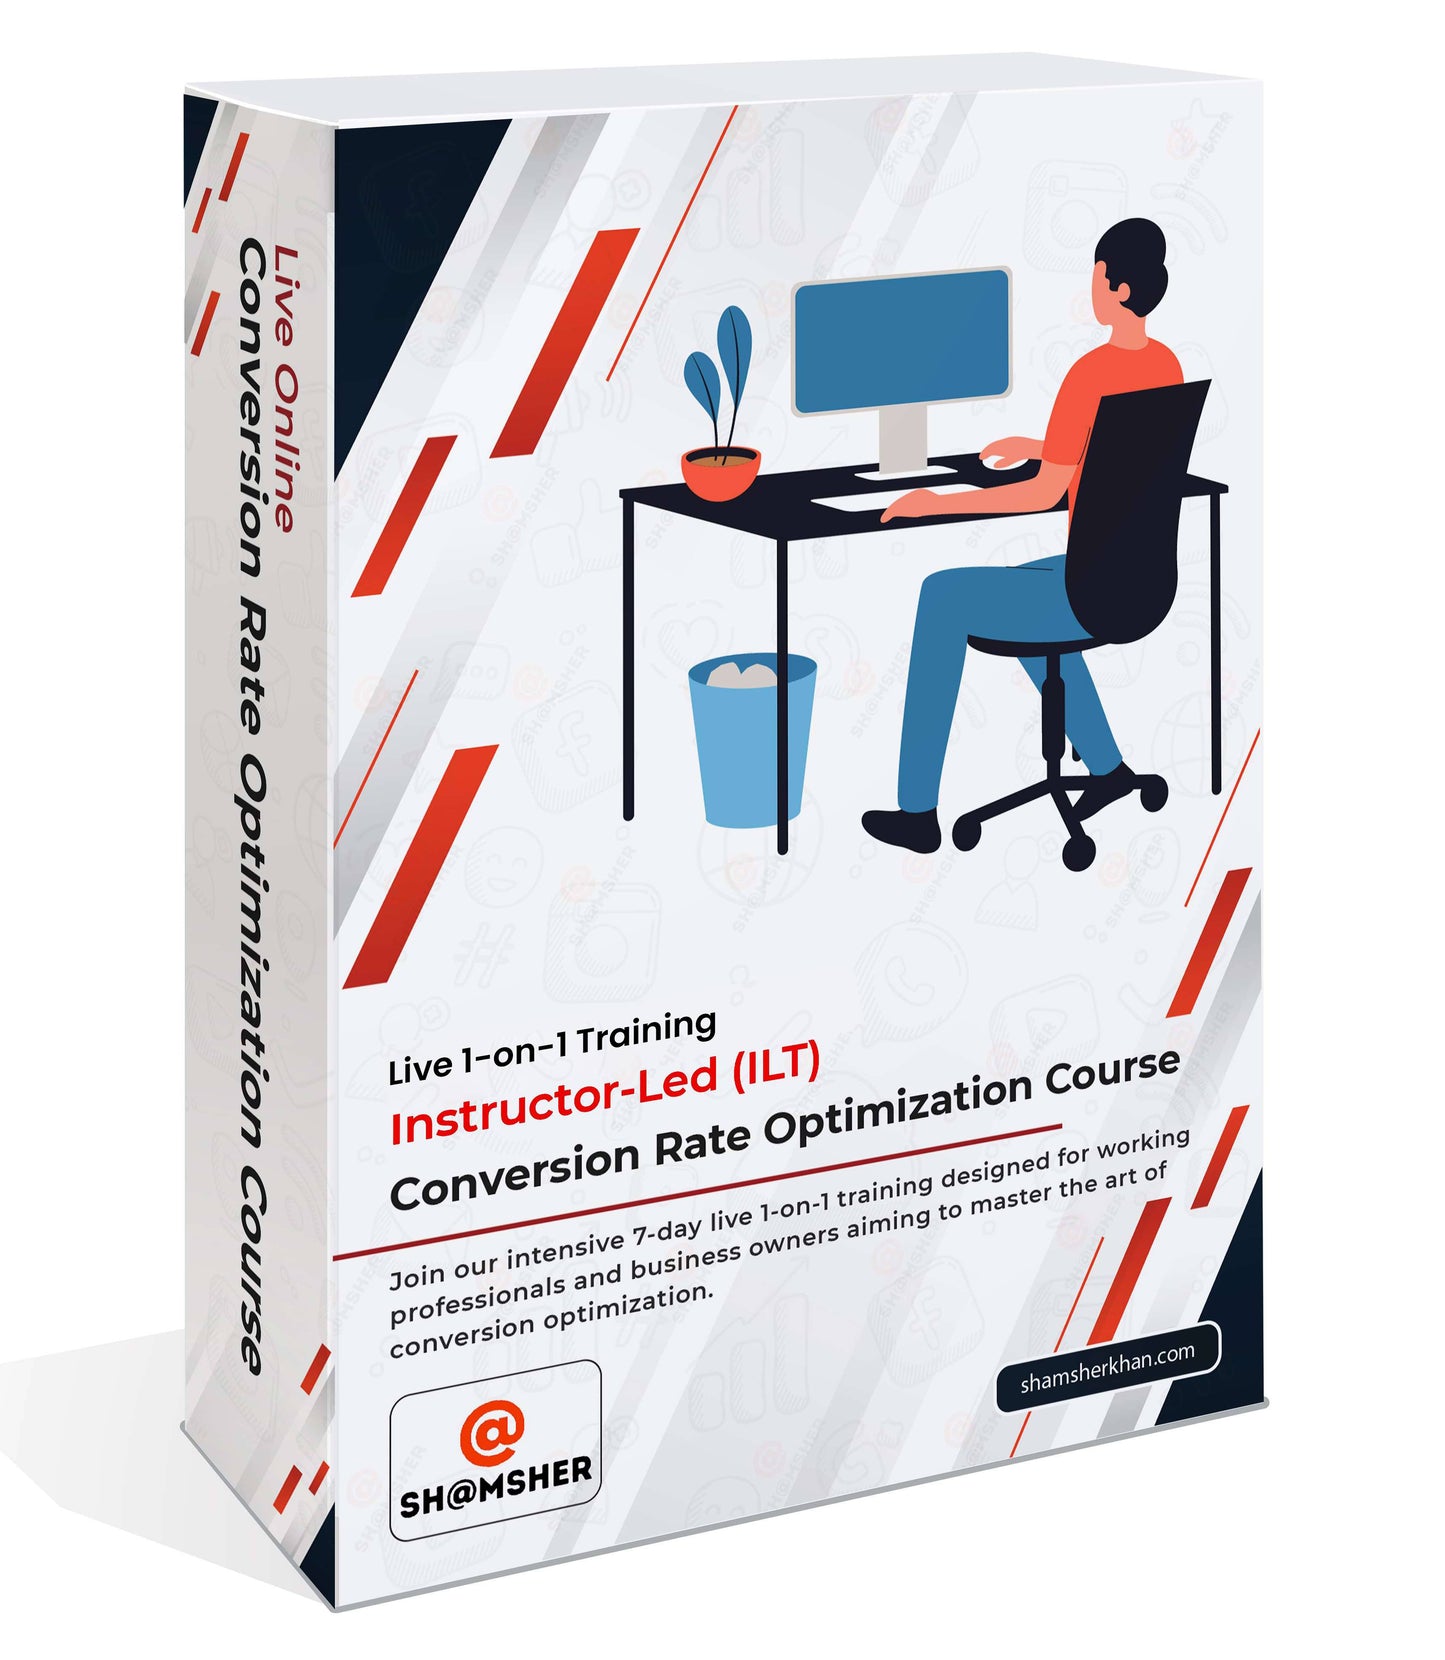 Conversion Rate Optimization Training - 7 Days 1-on-1 Live Online